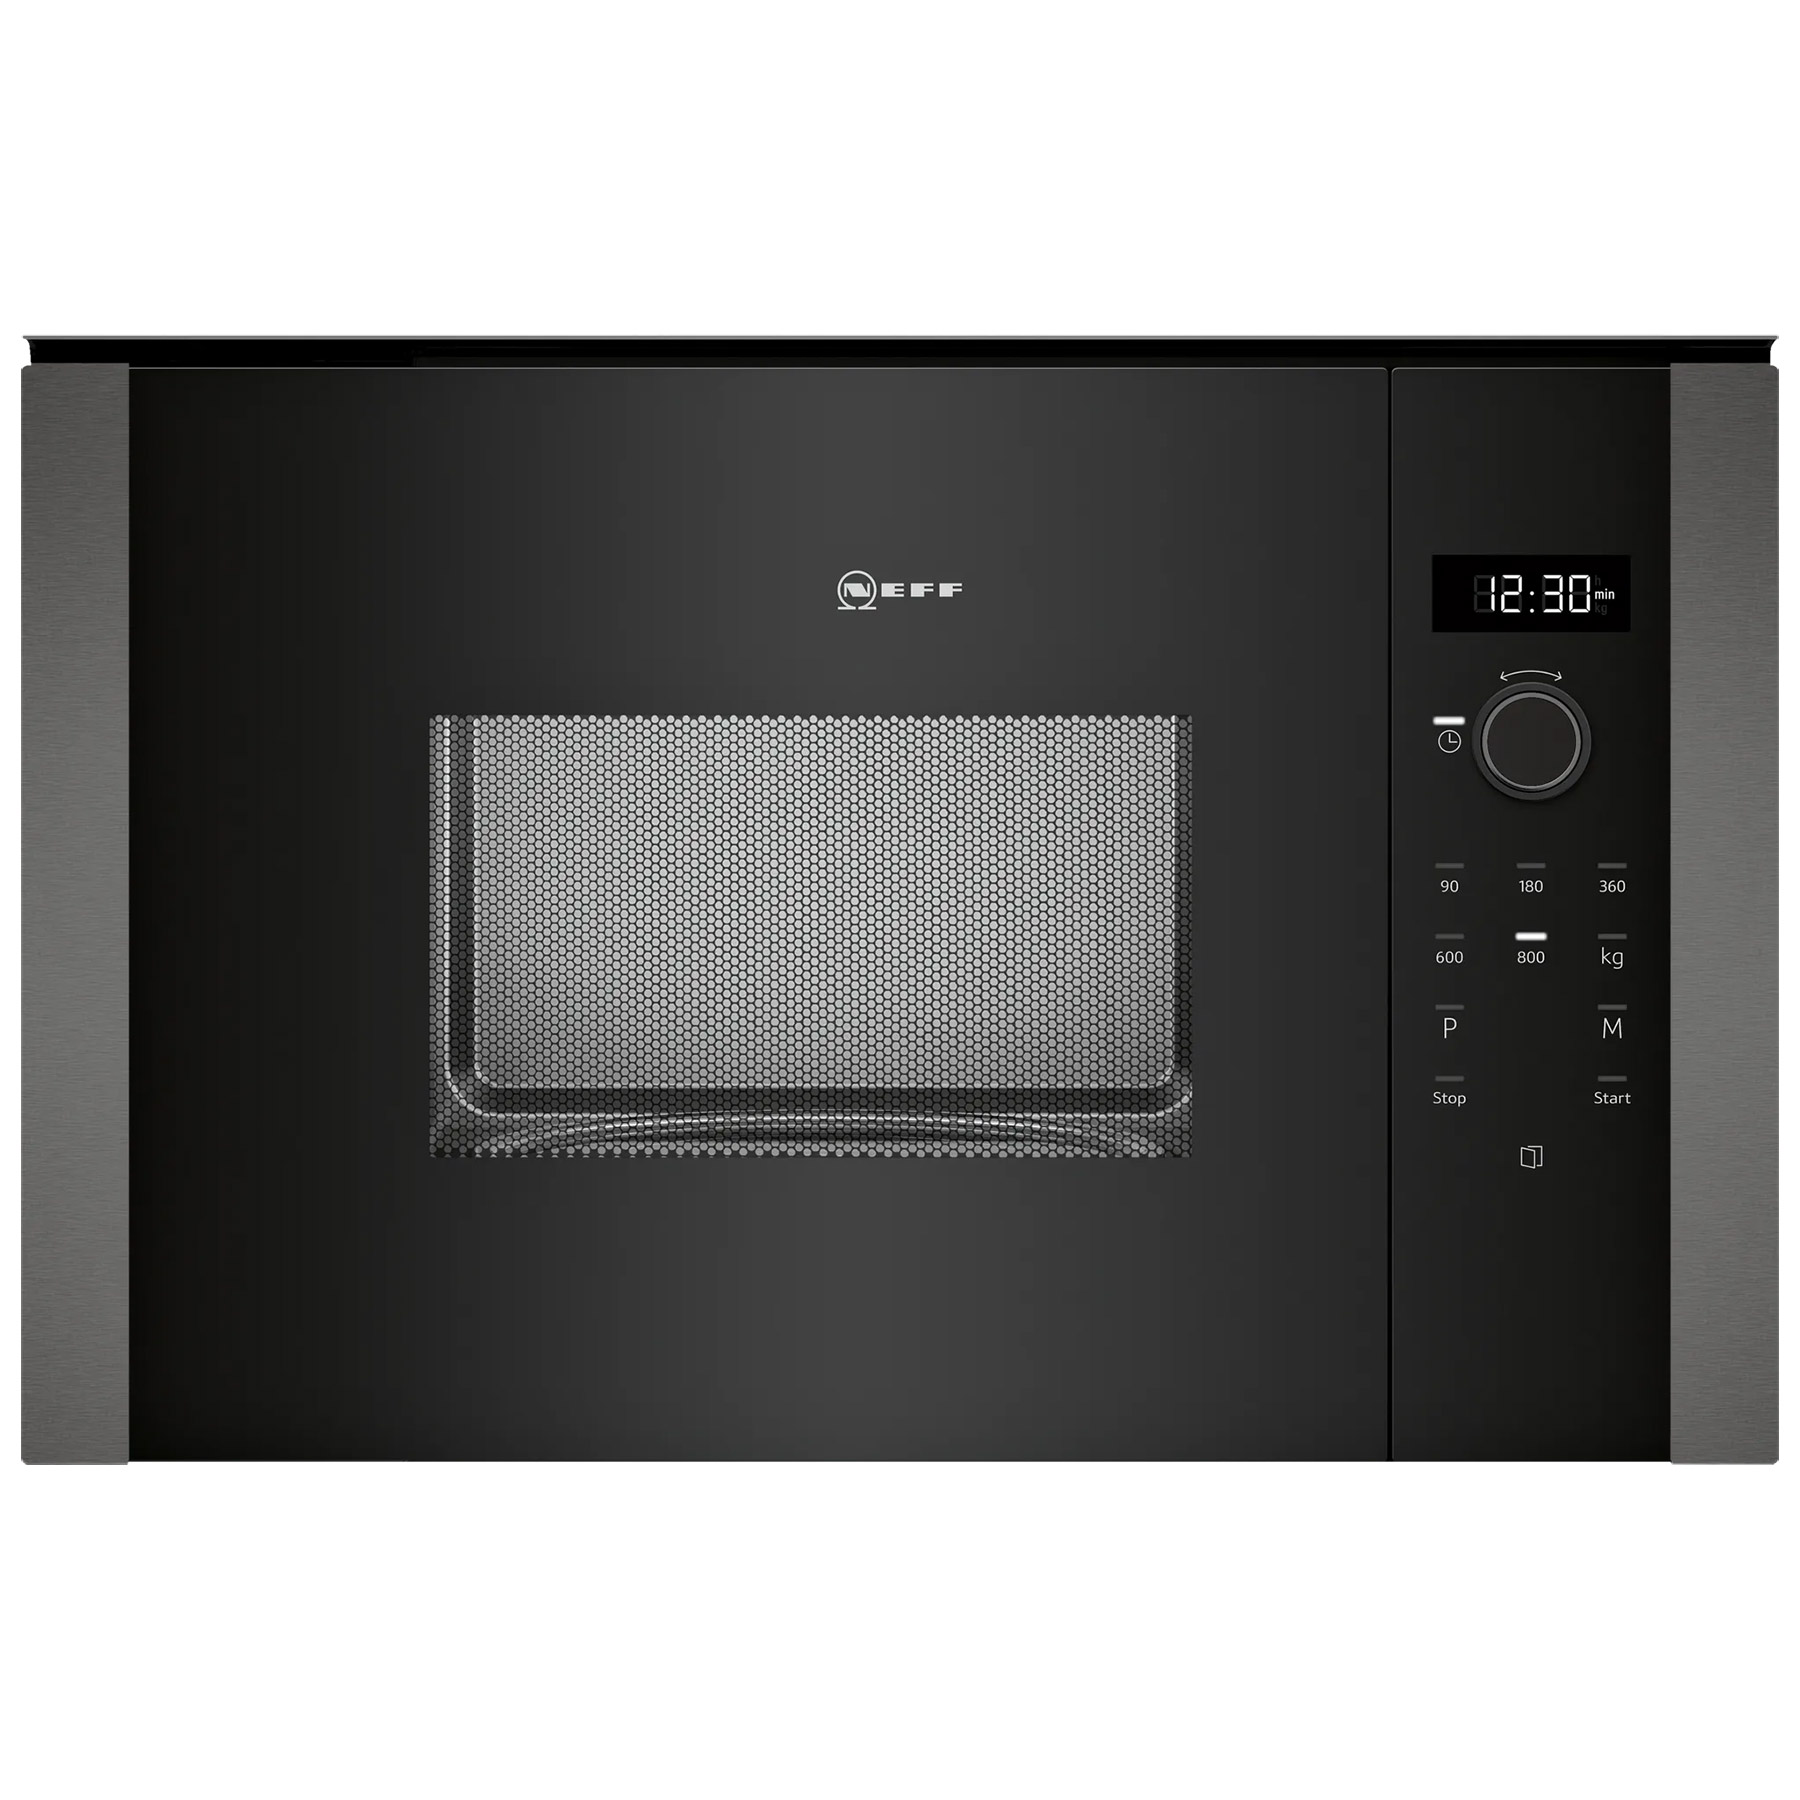 Neff HLAWD23G0B N50 Built In Microwave Oven Black Graphite 20L 800W